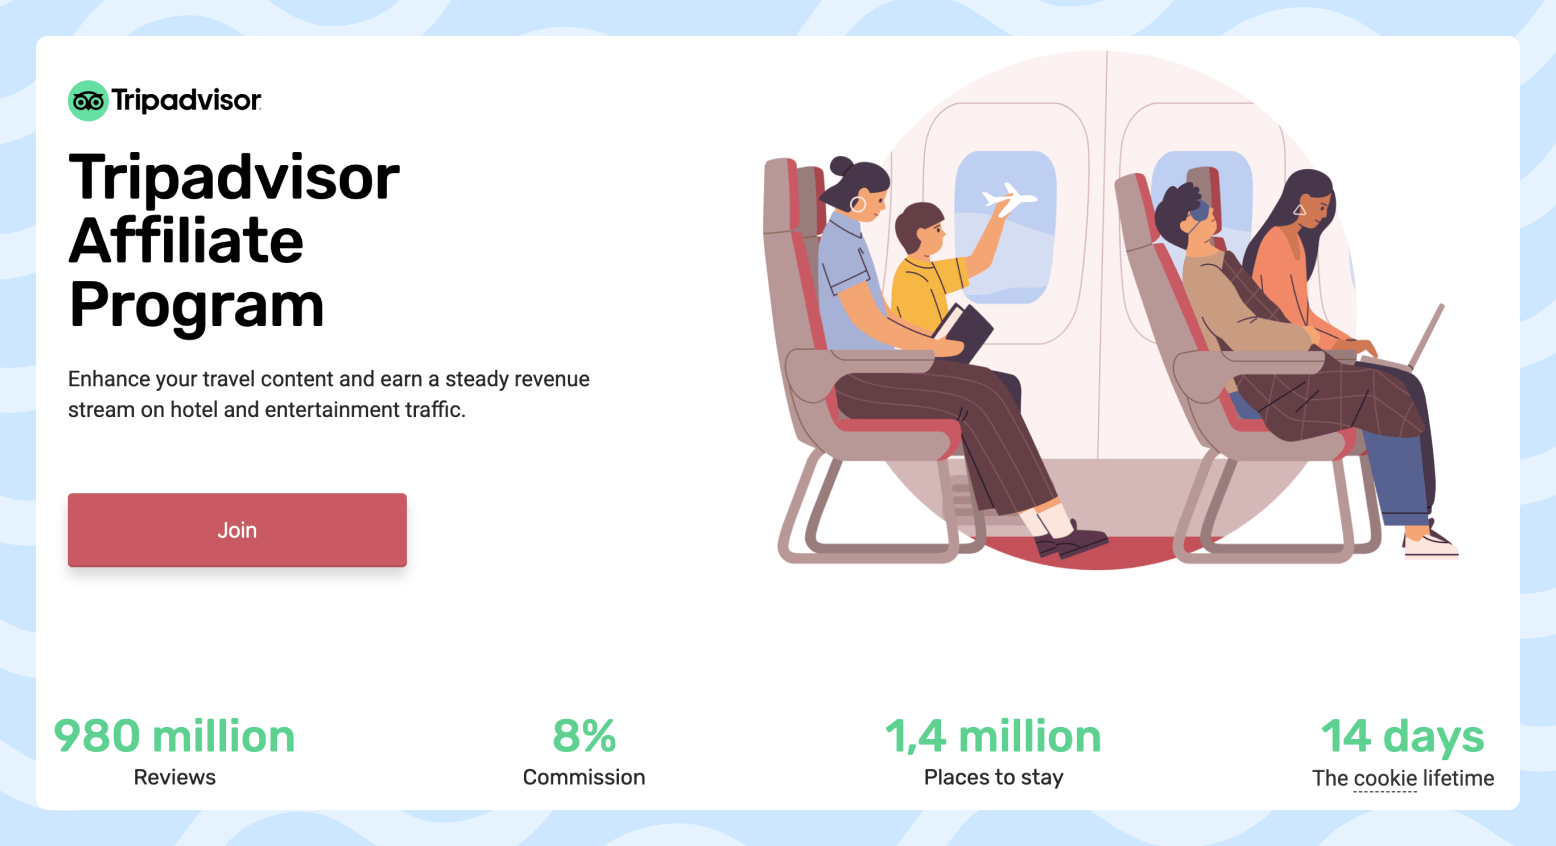 Landing page of the Tripadvisor affiliate program with the terms of the program and a picture depicting people on board the plane.